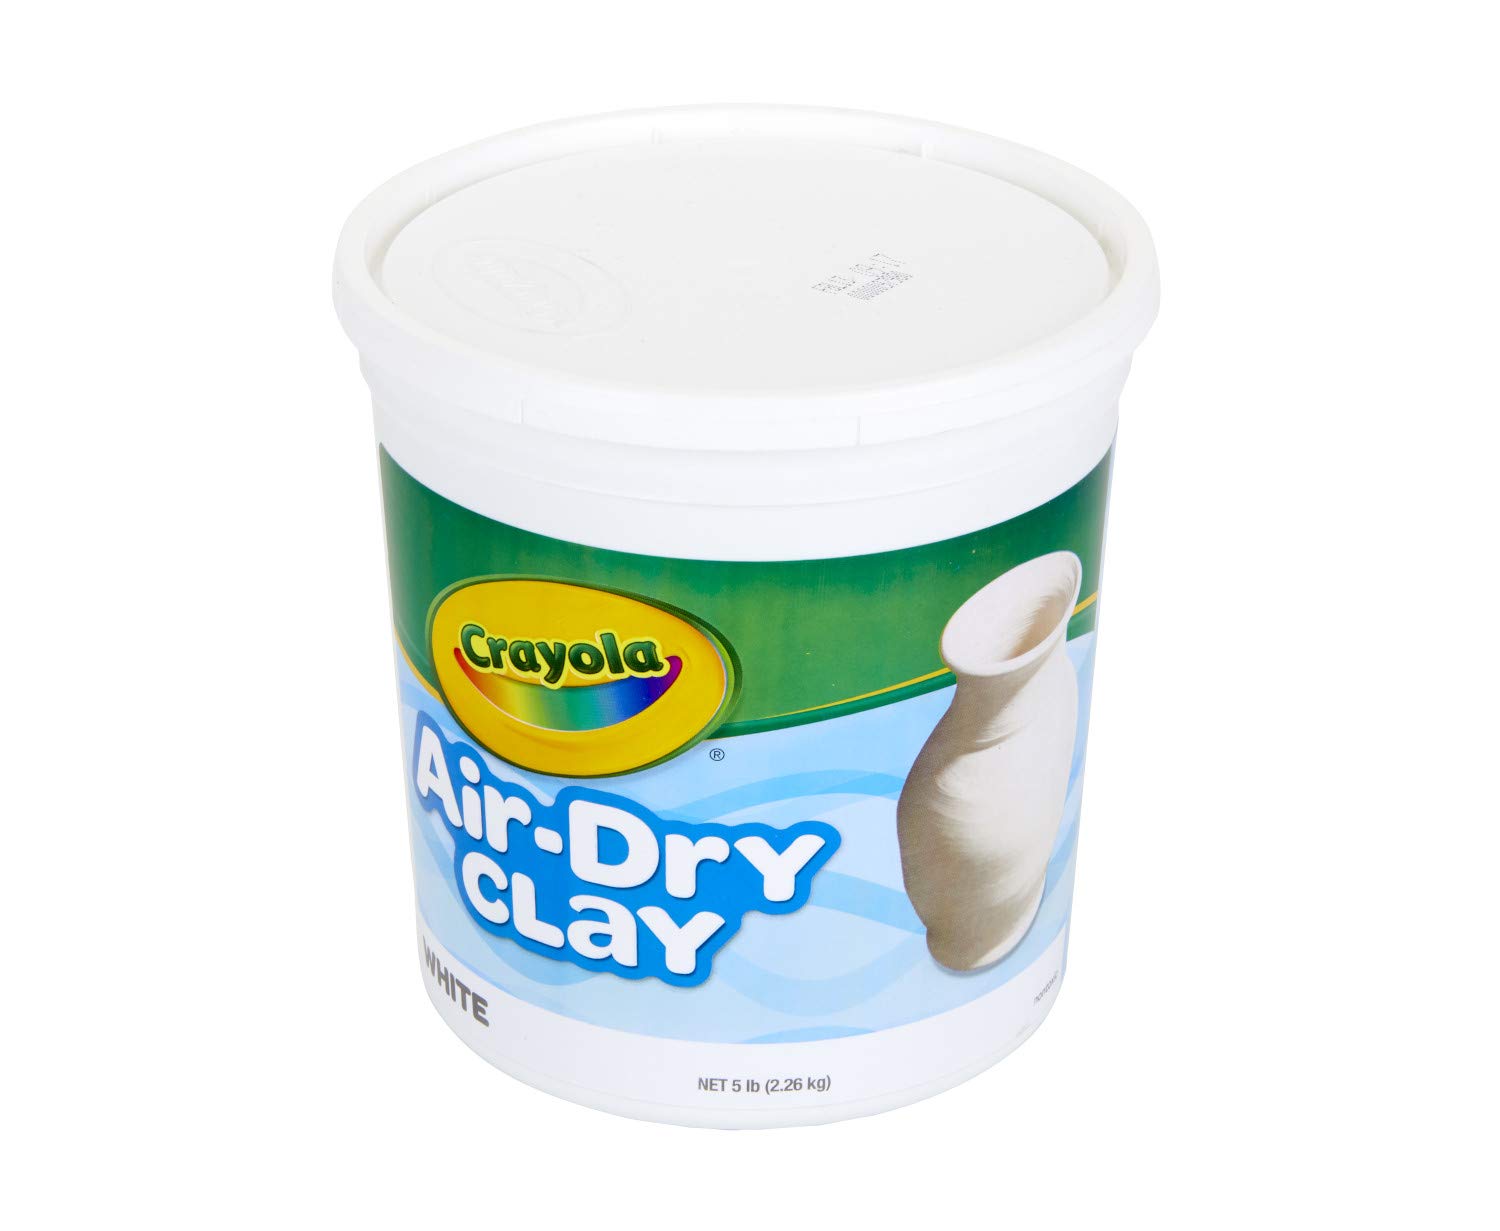 Crayola Air Dry Clay for Kids, Natural White Modeling Clay, 5 Lb Bucket [Amazon Exclusive]